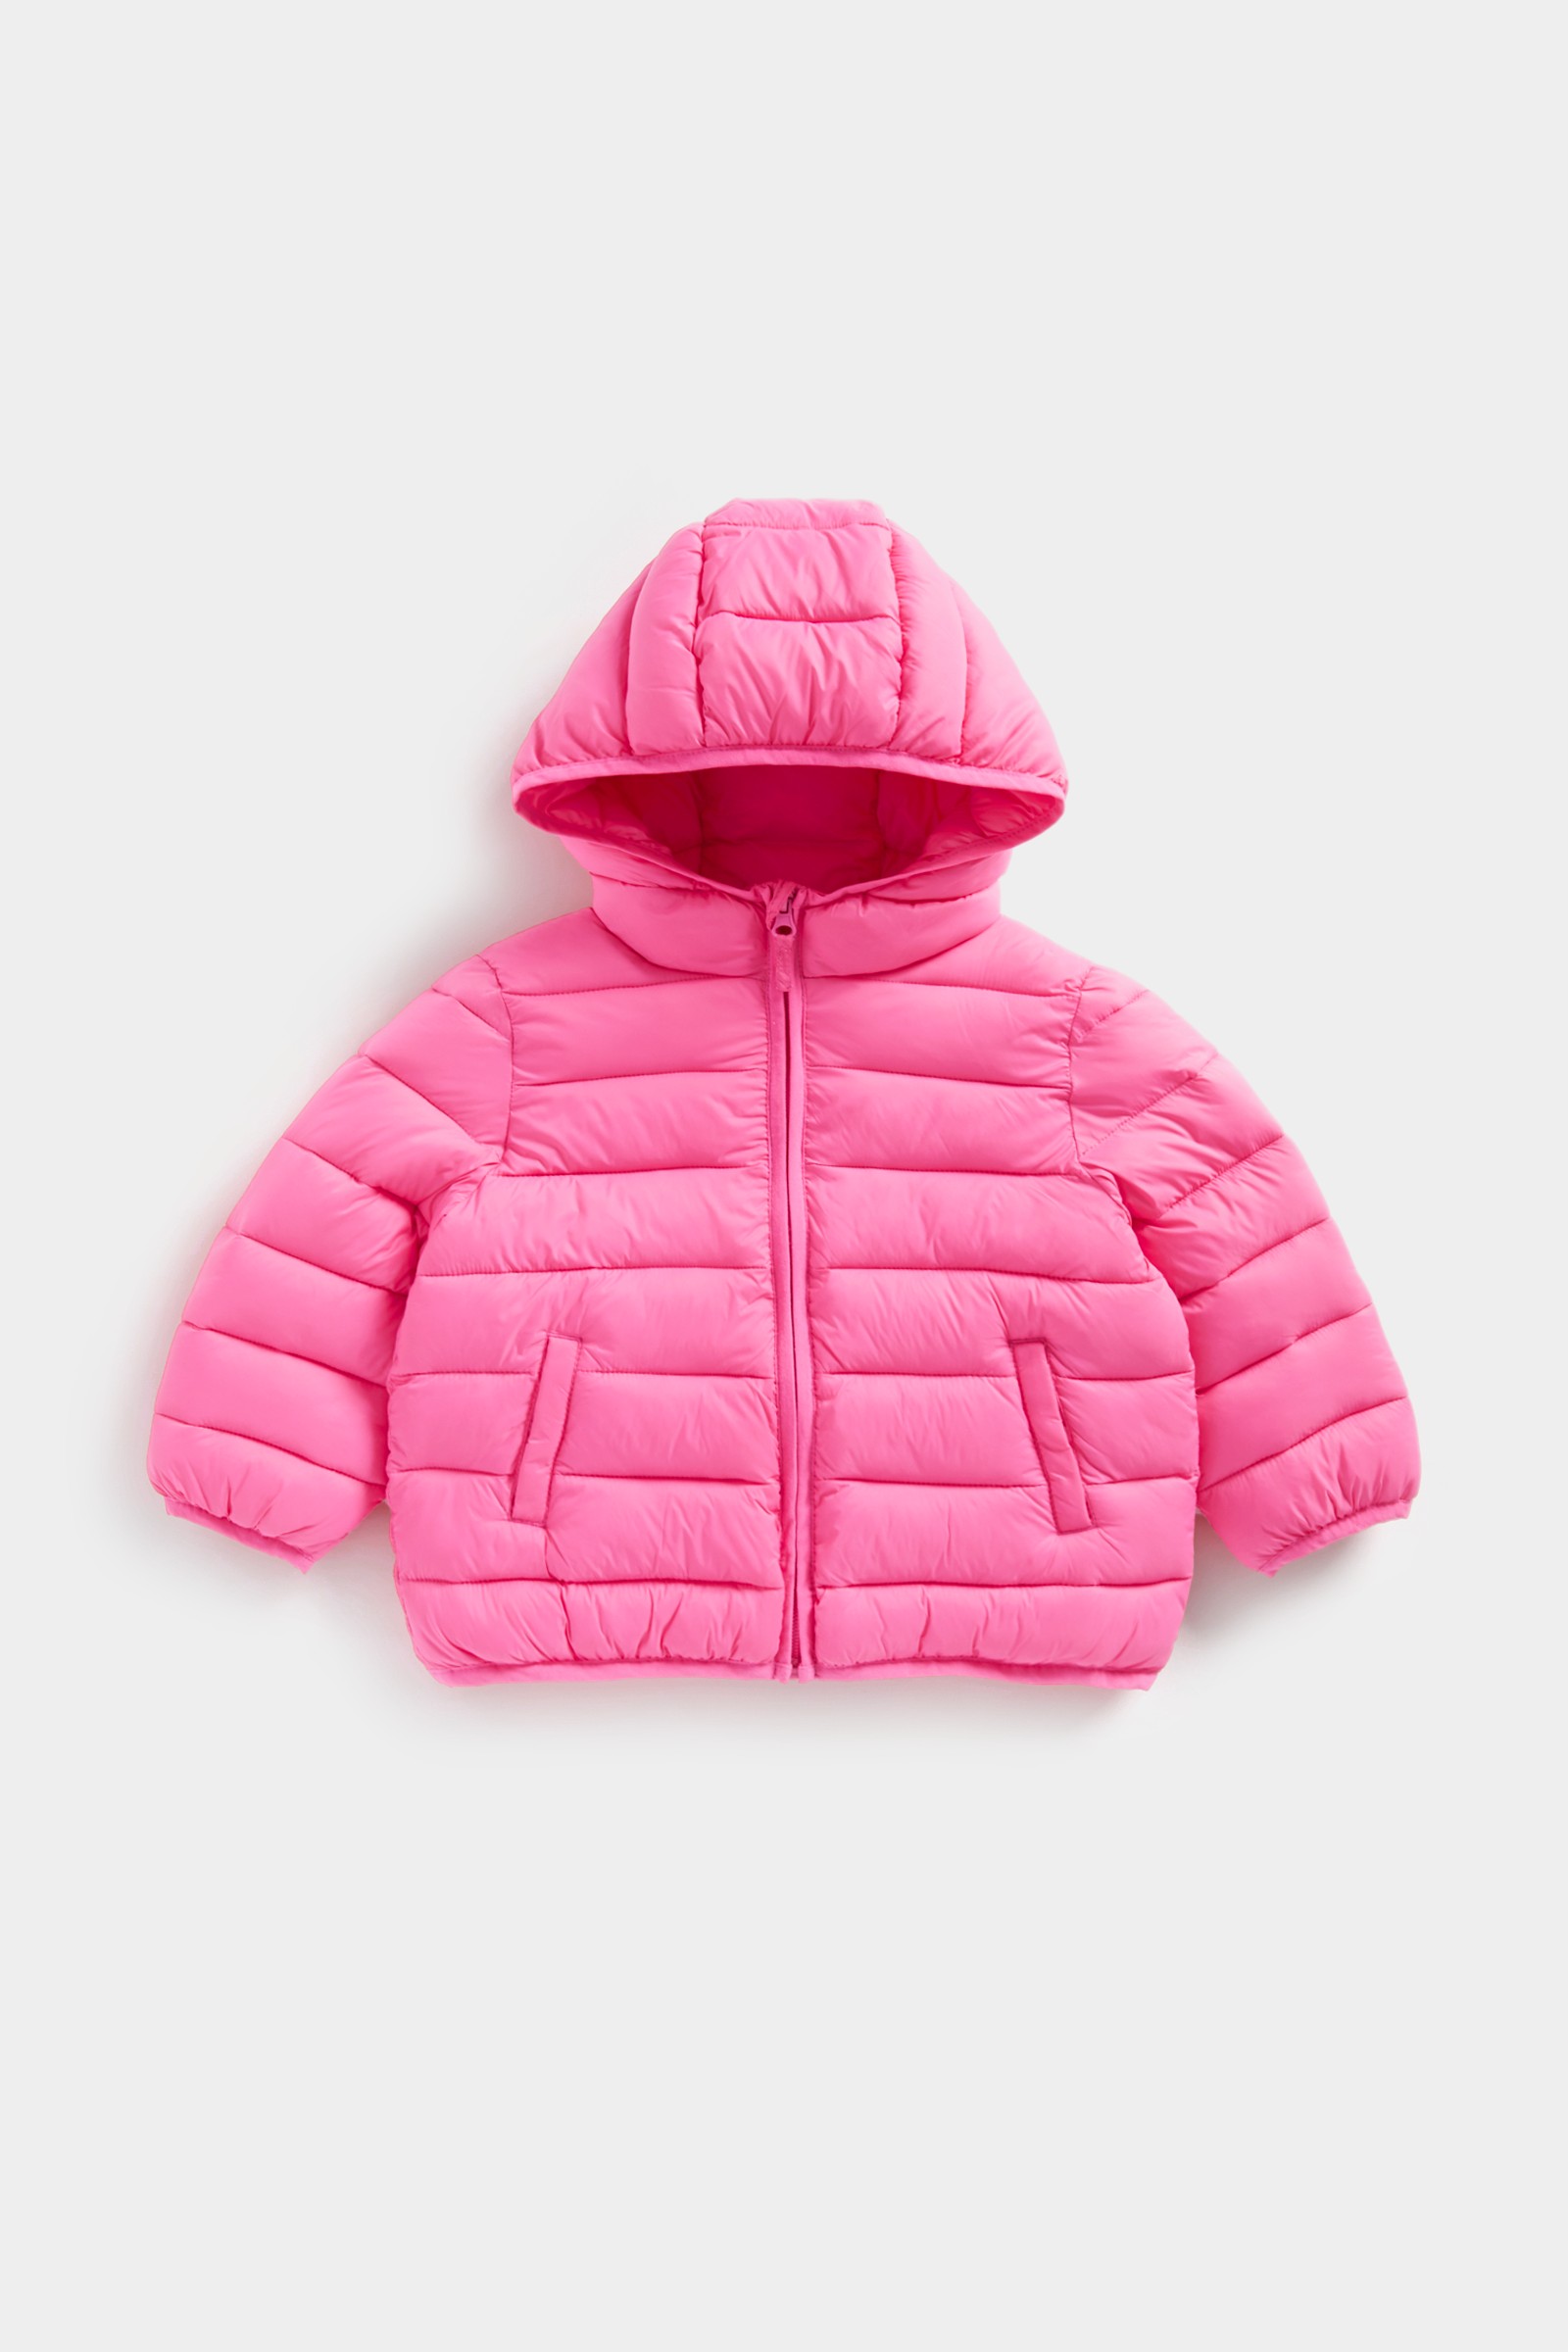 Ulykke Afstemning millimeter Buy Pink Pack-Away Quilted Jacket online | Mothercare Kuwait